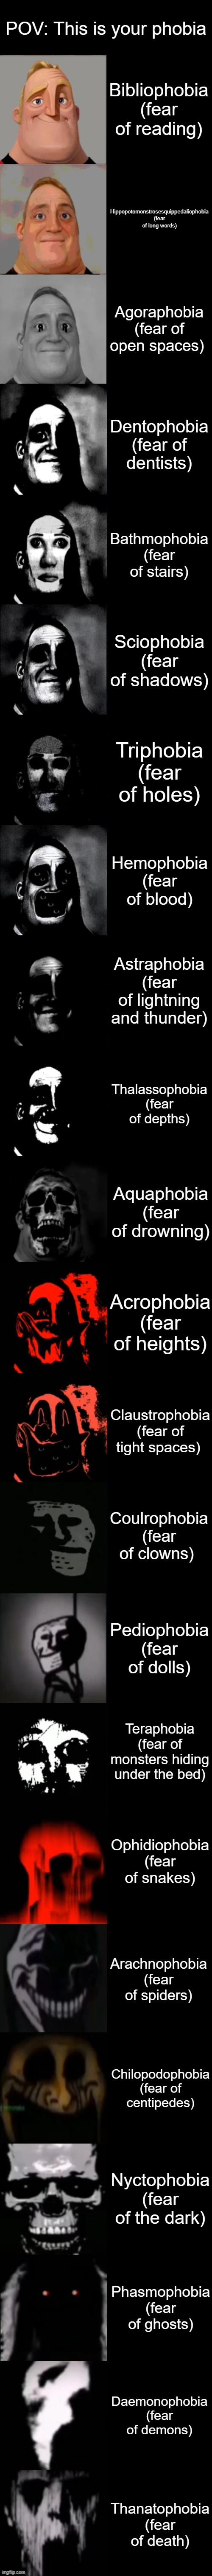 Phobias are insane  | POV: This is your phobia; Bibliophobia (fear of reading); Hippopotomonstrosesquippedaliophobia (fear of long words); Agoraphobia (fear of open spaces); Dentophobia (fear of dentists); Bathmophobia (fear of stairs); Sciophobia (fear of shadows); Triphobia (fear of holes); Hemophobia (fear of blood); Astraphobia (fear of lightning and thunder); Thalassophobia (fear of depths); Aquaphobia (fear of drowning); Acrophobia (fear of heights); Claustrophobia (fear of tight spaces); Coulrophobia (fear of clowns); Pediophobia (fear of dolls); Teraphobia (fear of monsters hiding under the bed); Ophidiophobia (fear of snakes); Arachnophobia (fear of spiders); Chilopodophobia (fear of centipedes); Nyctophobia (fear of the dark); Phasmophobia (fear of ghosts); Daemonophobia (fear of demons); Thanatophobia (fear of death) | image tagged in mr incredible becoming uncanny extended hd | made w/ Imgflip meme maker